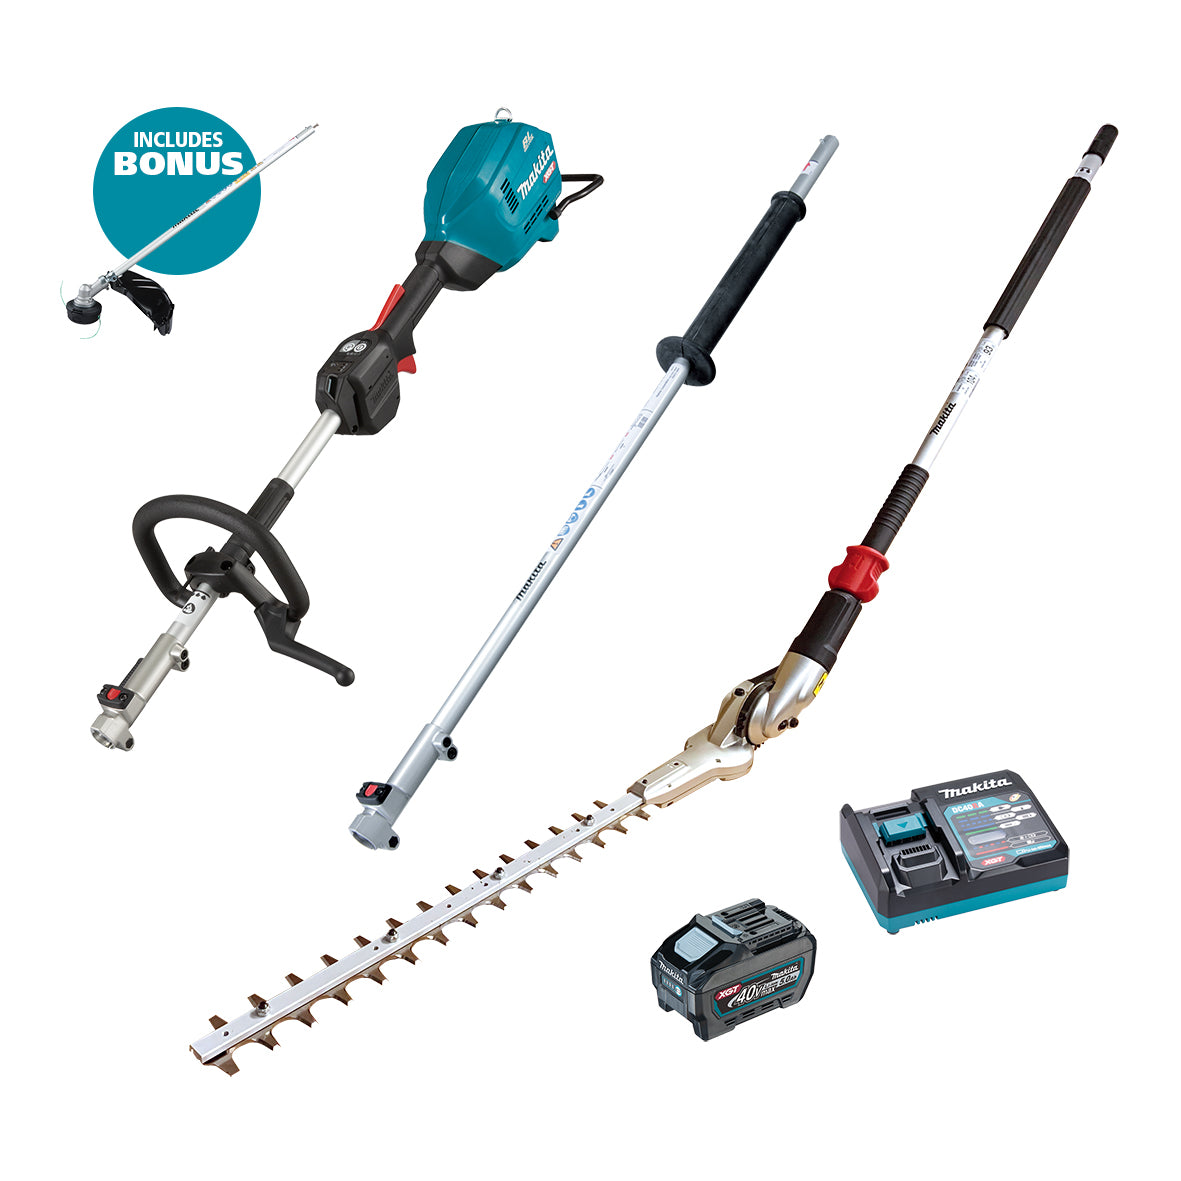 *Limited Edition* 40V Max Brushless Multi-Function Powerhead Kit UX01GT101-B by Makita